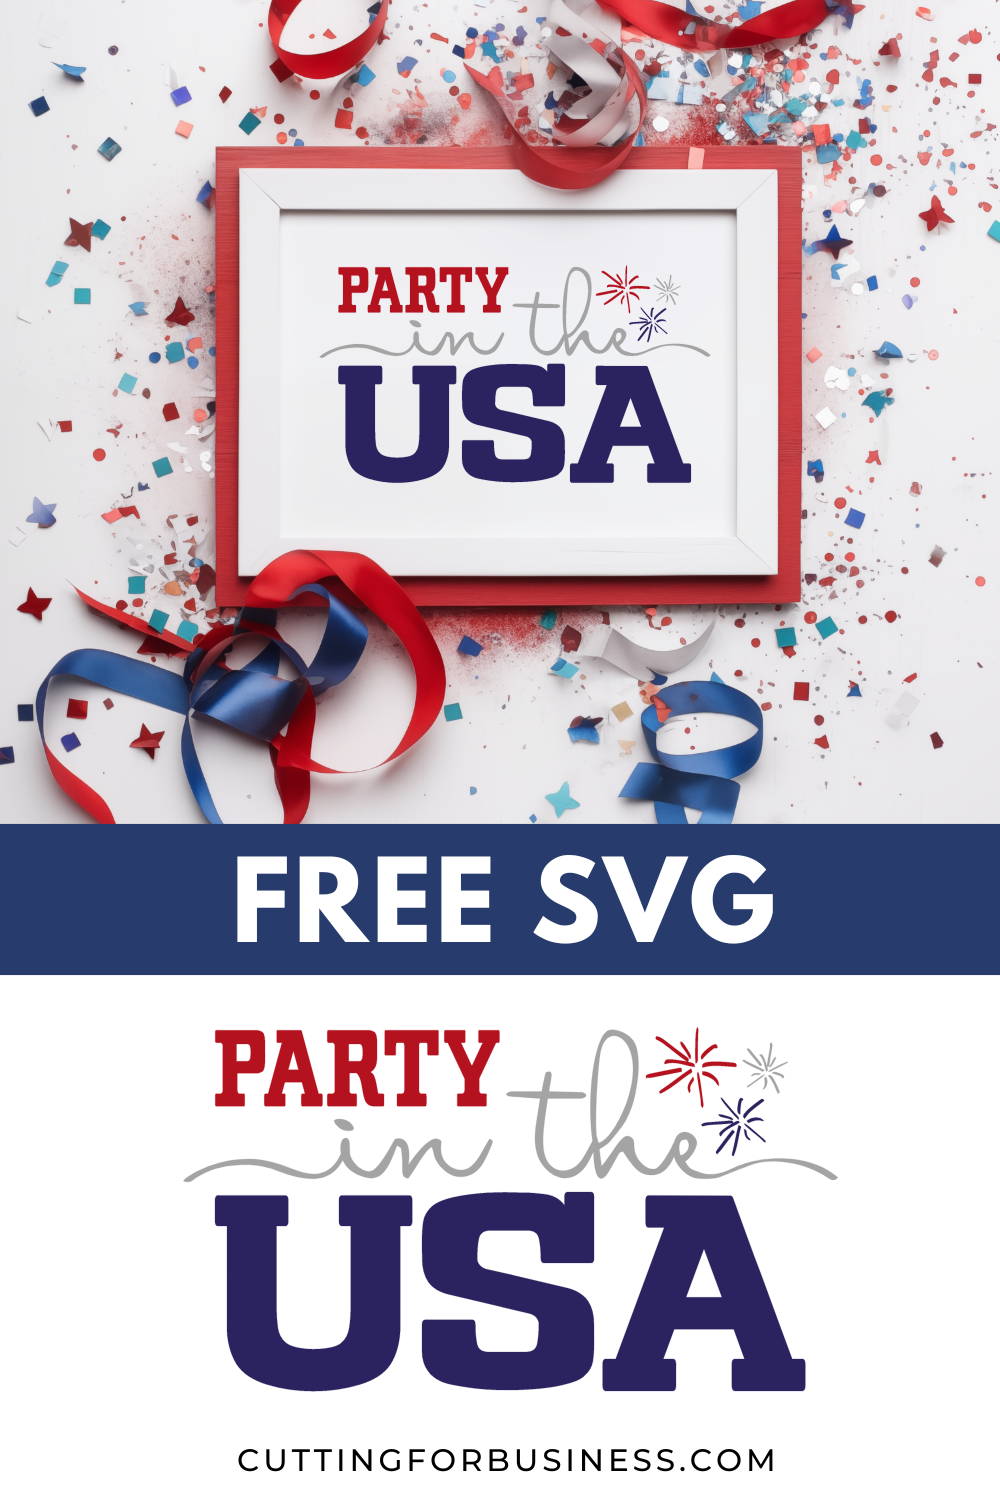 Free July 4th SVG - Party in the USA - cuttingforbusiness.com